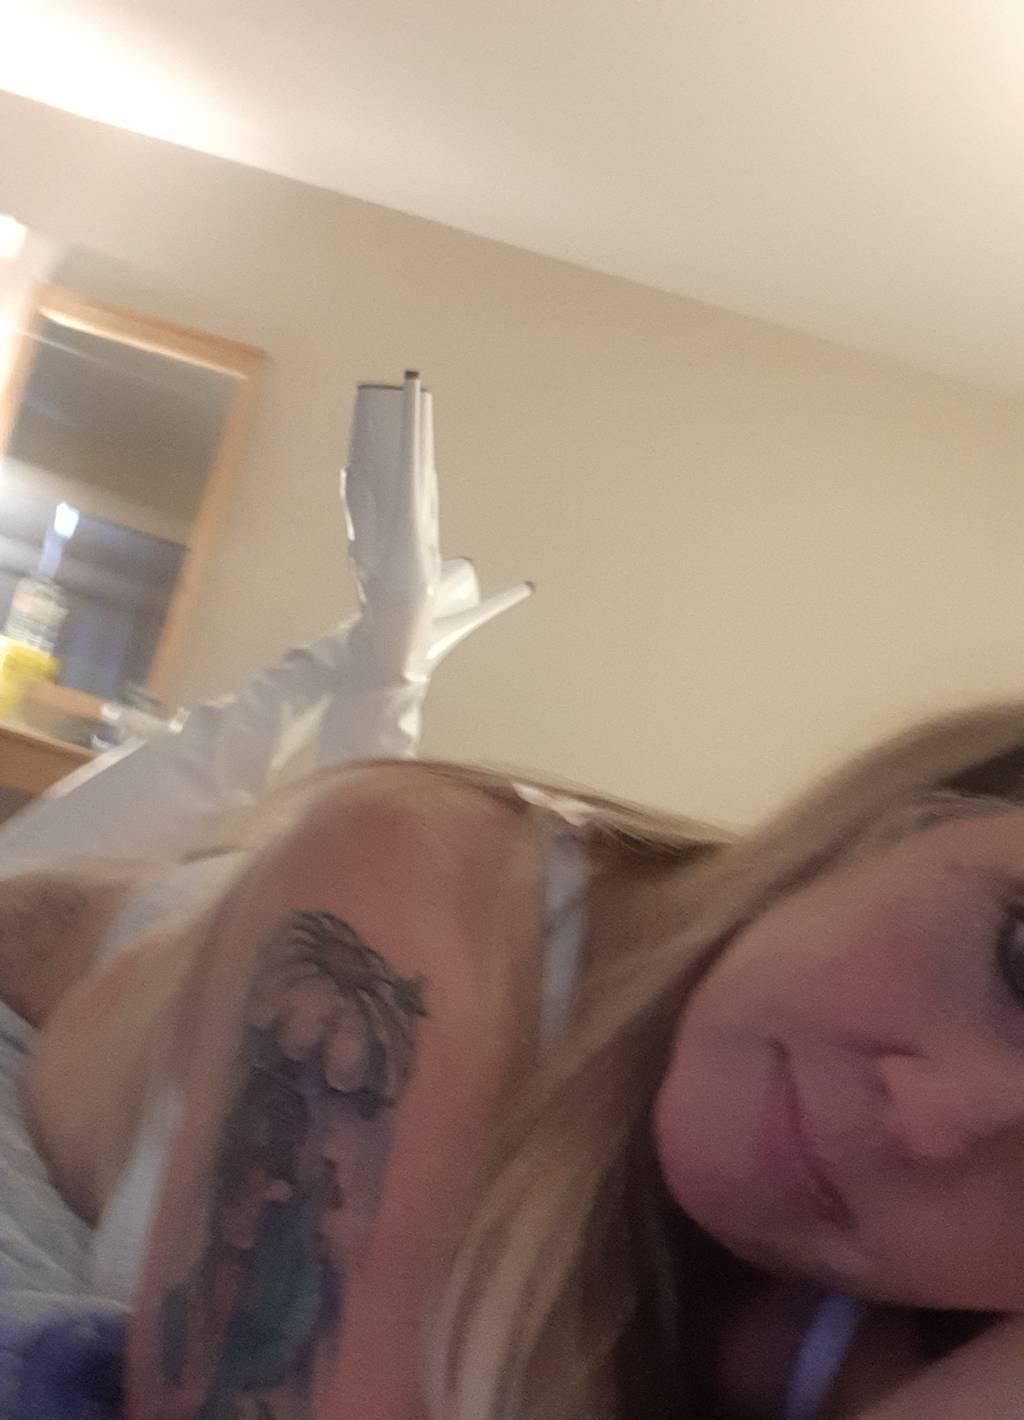 YOU know my HEAD game is BANG on SEXY COUGARNIKKI